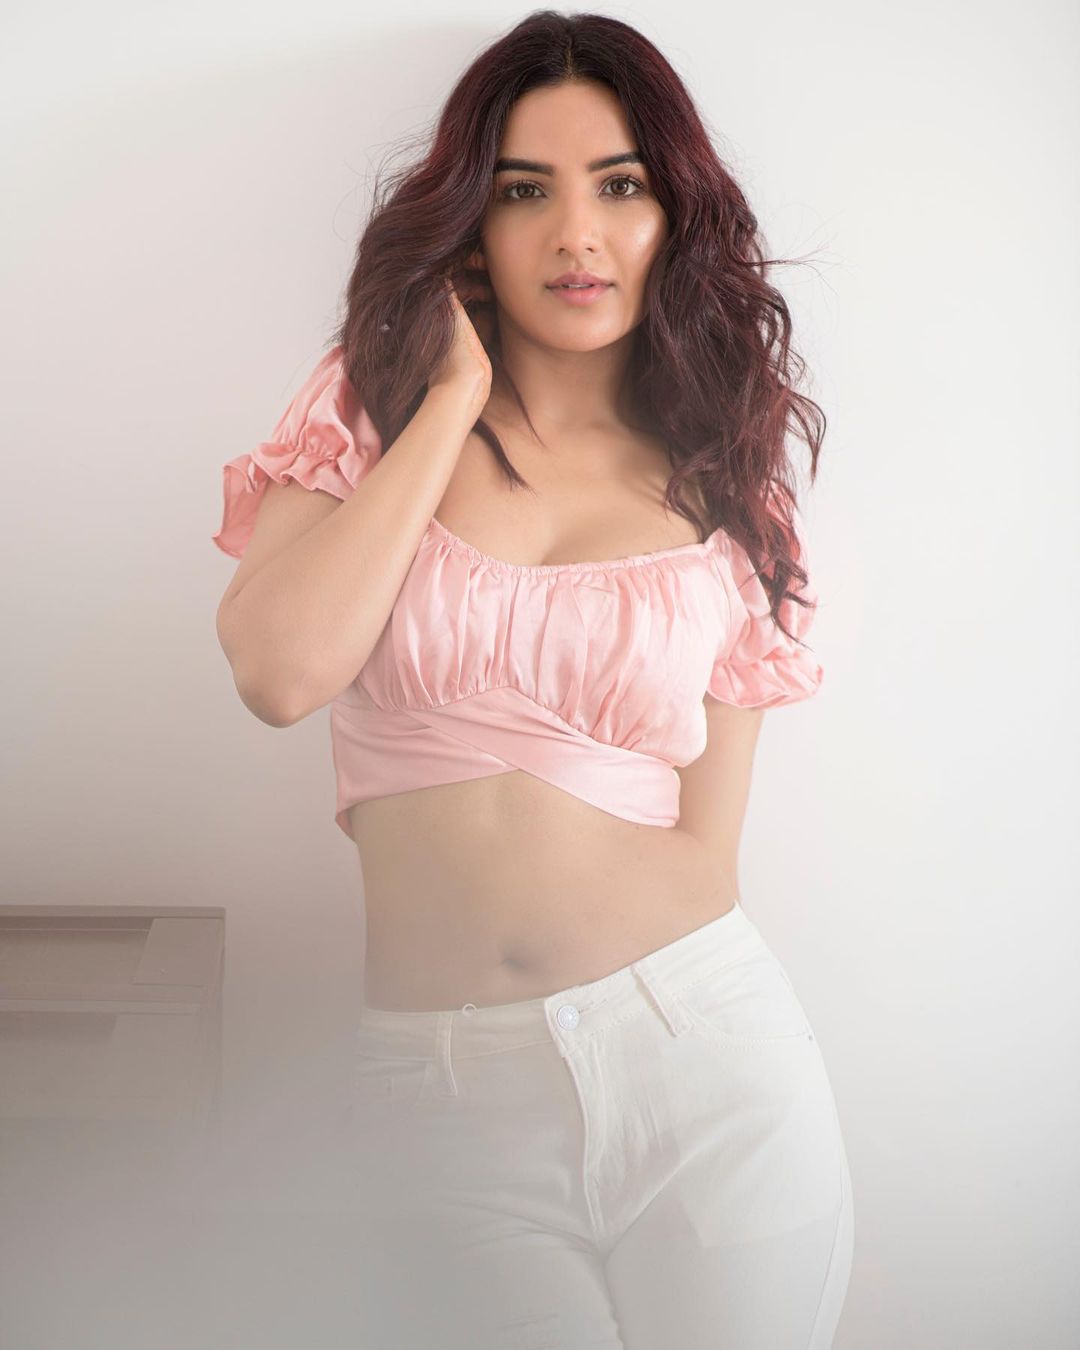  Jasmin Bhasin works her charm in the crop top and white pants. (Image: Instagram)